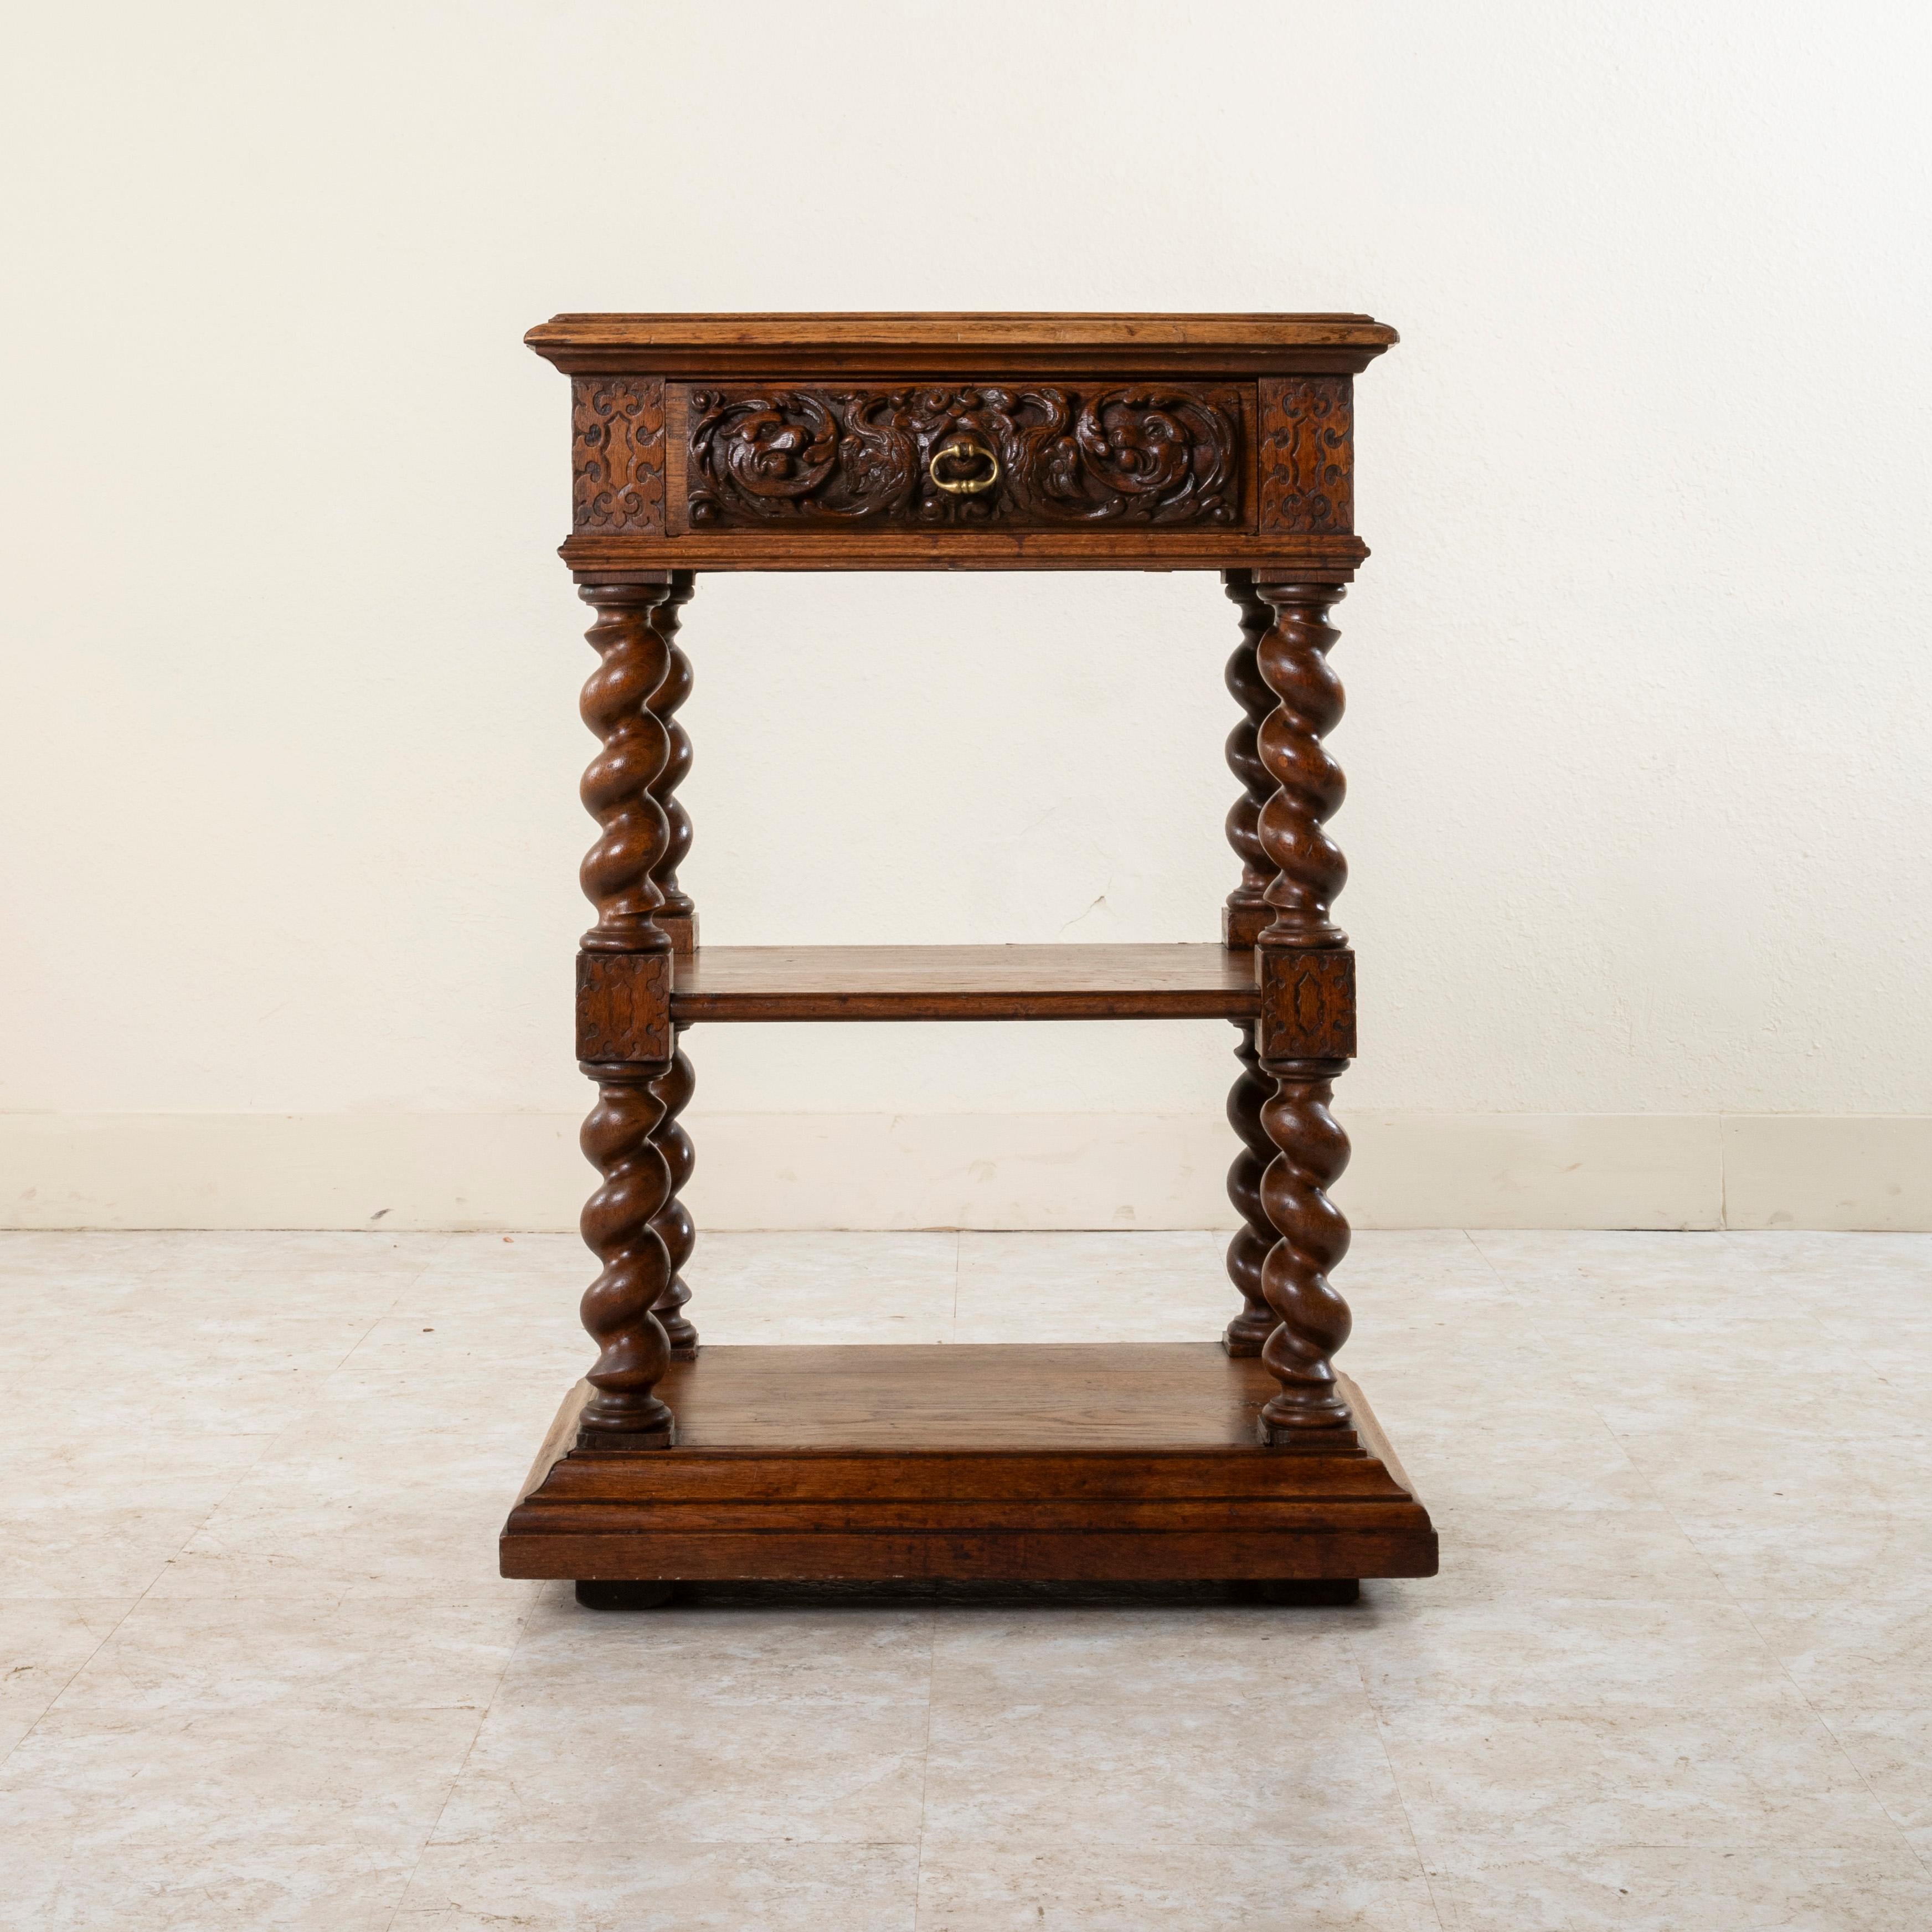 This small scale Louis XIII style hand-carved oak dessert buffet from the late nineteenth century features carvings on three sides. Cartouches and scrolling in bas relief carving adorn the die joints. The drawer front below the beveled top is